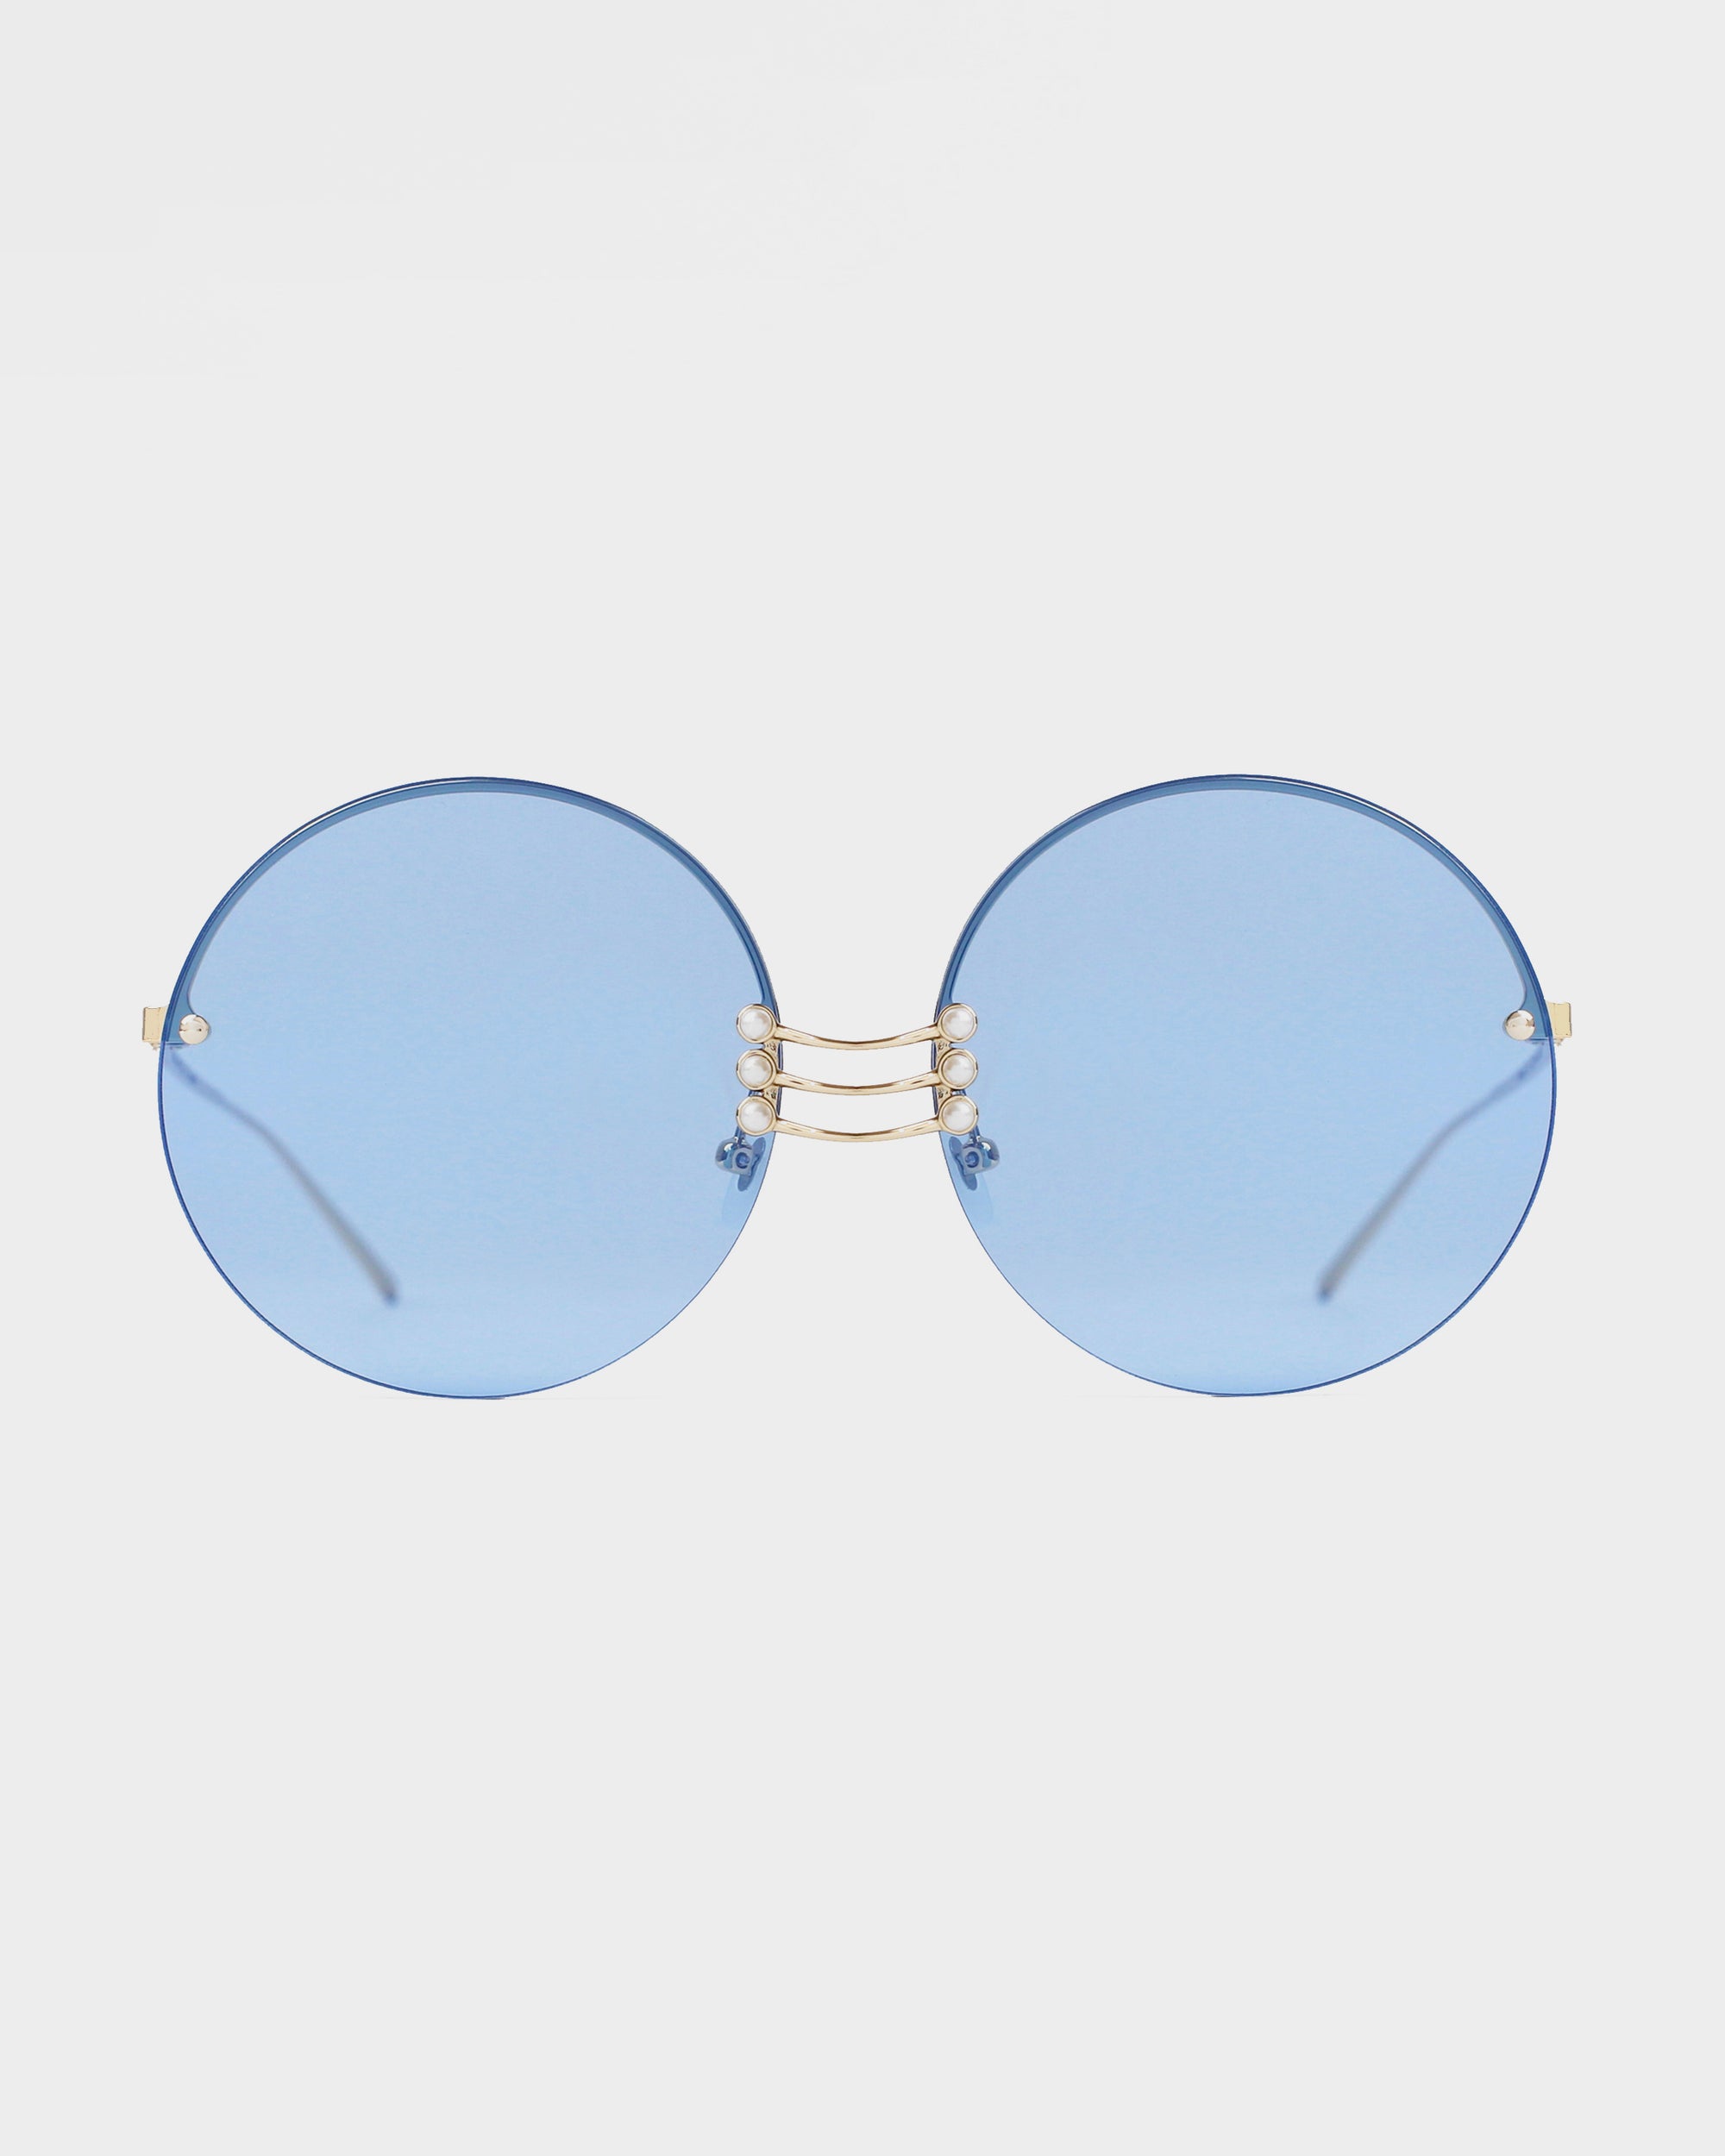 A pair of Vermeer sunglasses from For Art&#39;s Sake® with blue lenses and a thin gold metal frame. The bridge of the Vermeer sunglasses features two small connected bars, while the stainless steel frames ensure durability. The background is plain white, allowing the Vermeer sunglasses to be the focal point.